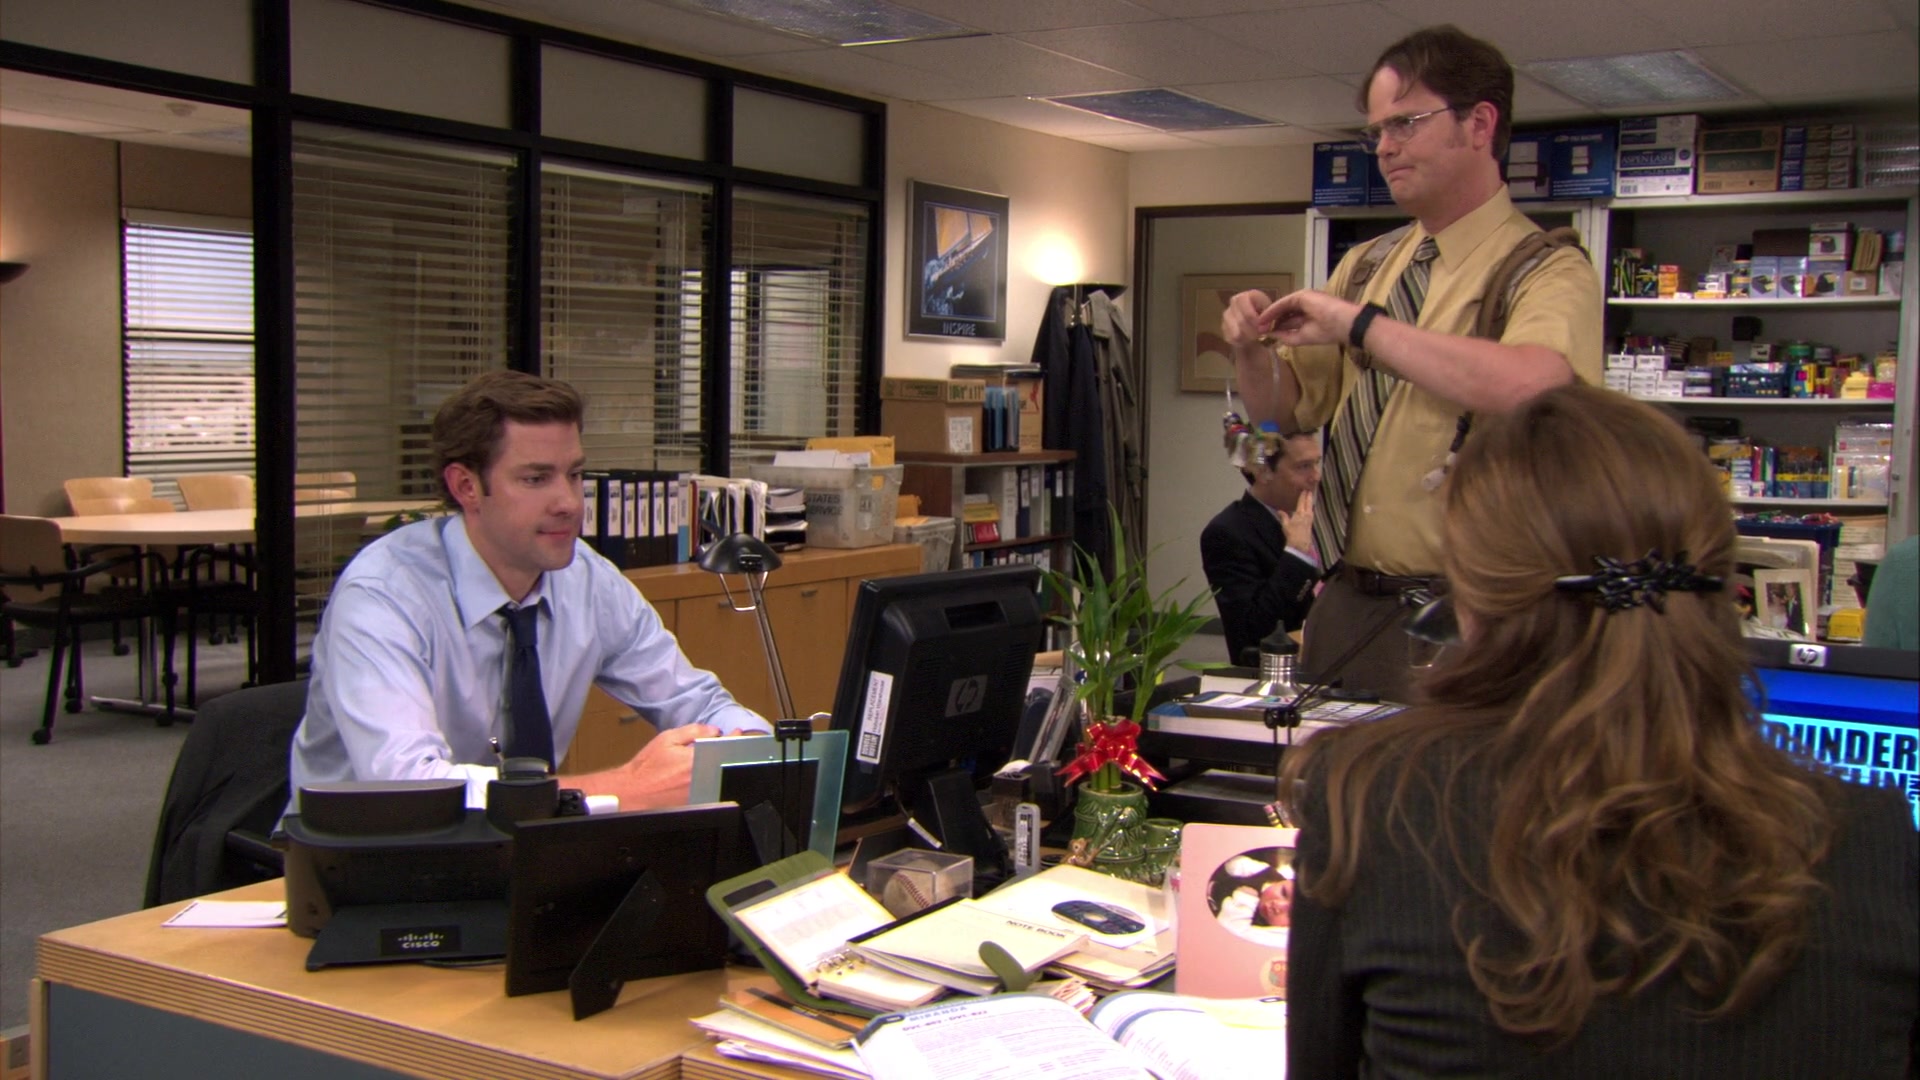 Is the office small